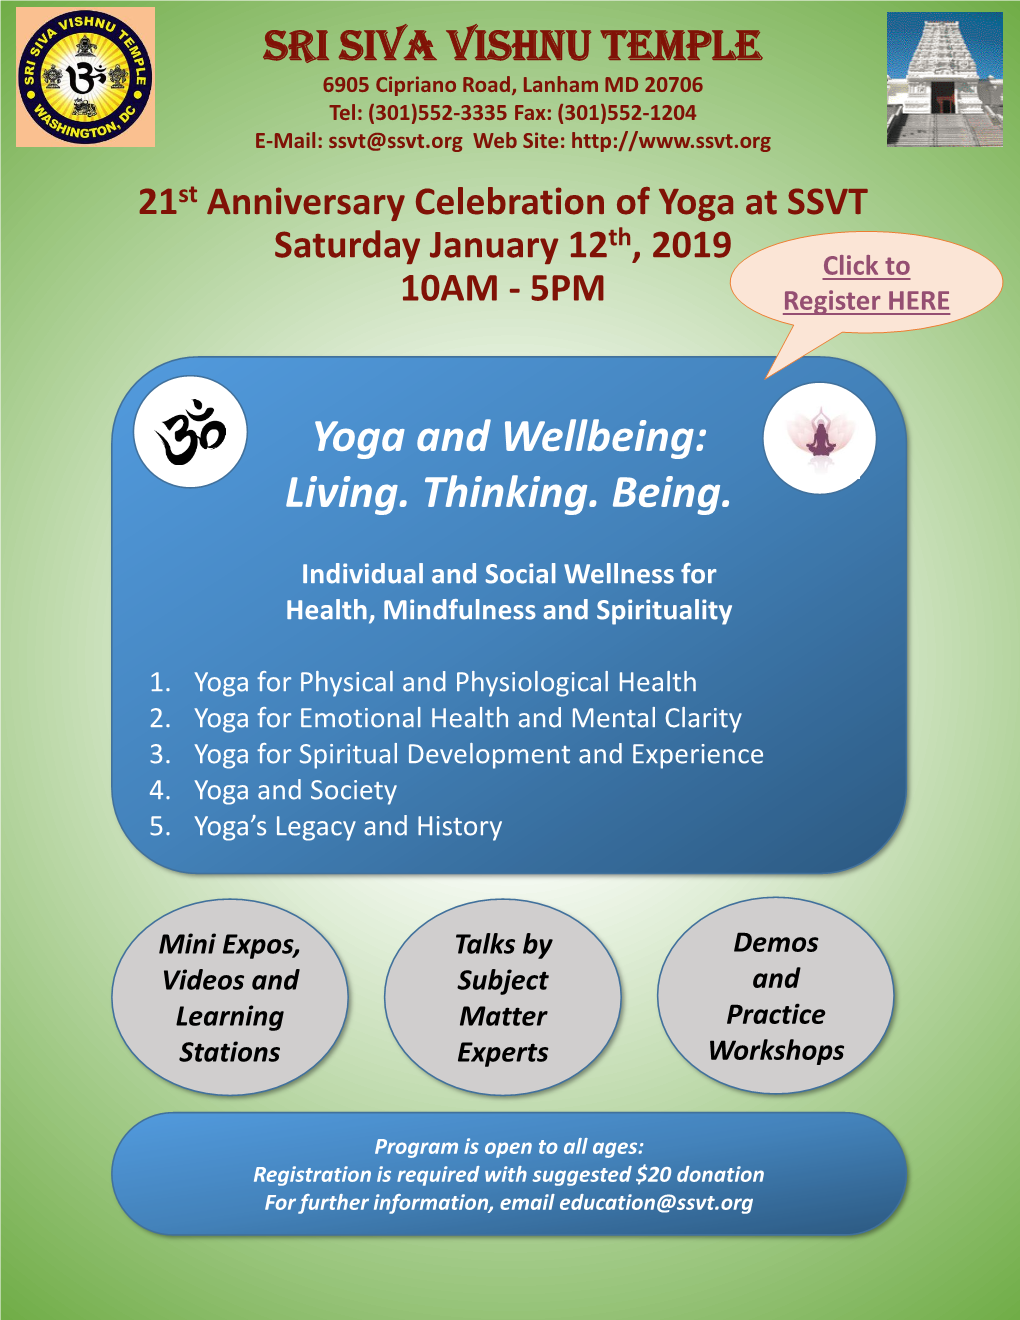 Yoga and Wellbeing: Living